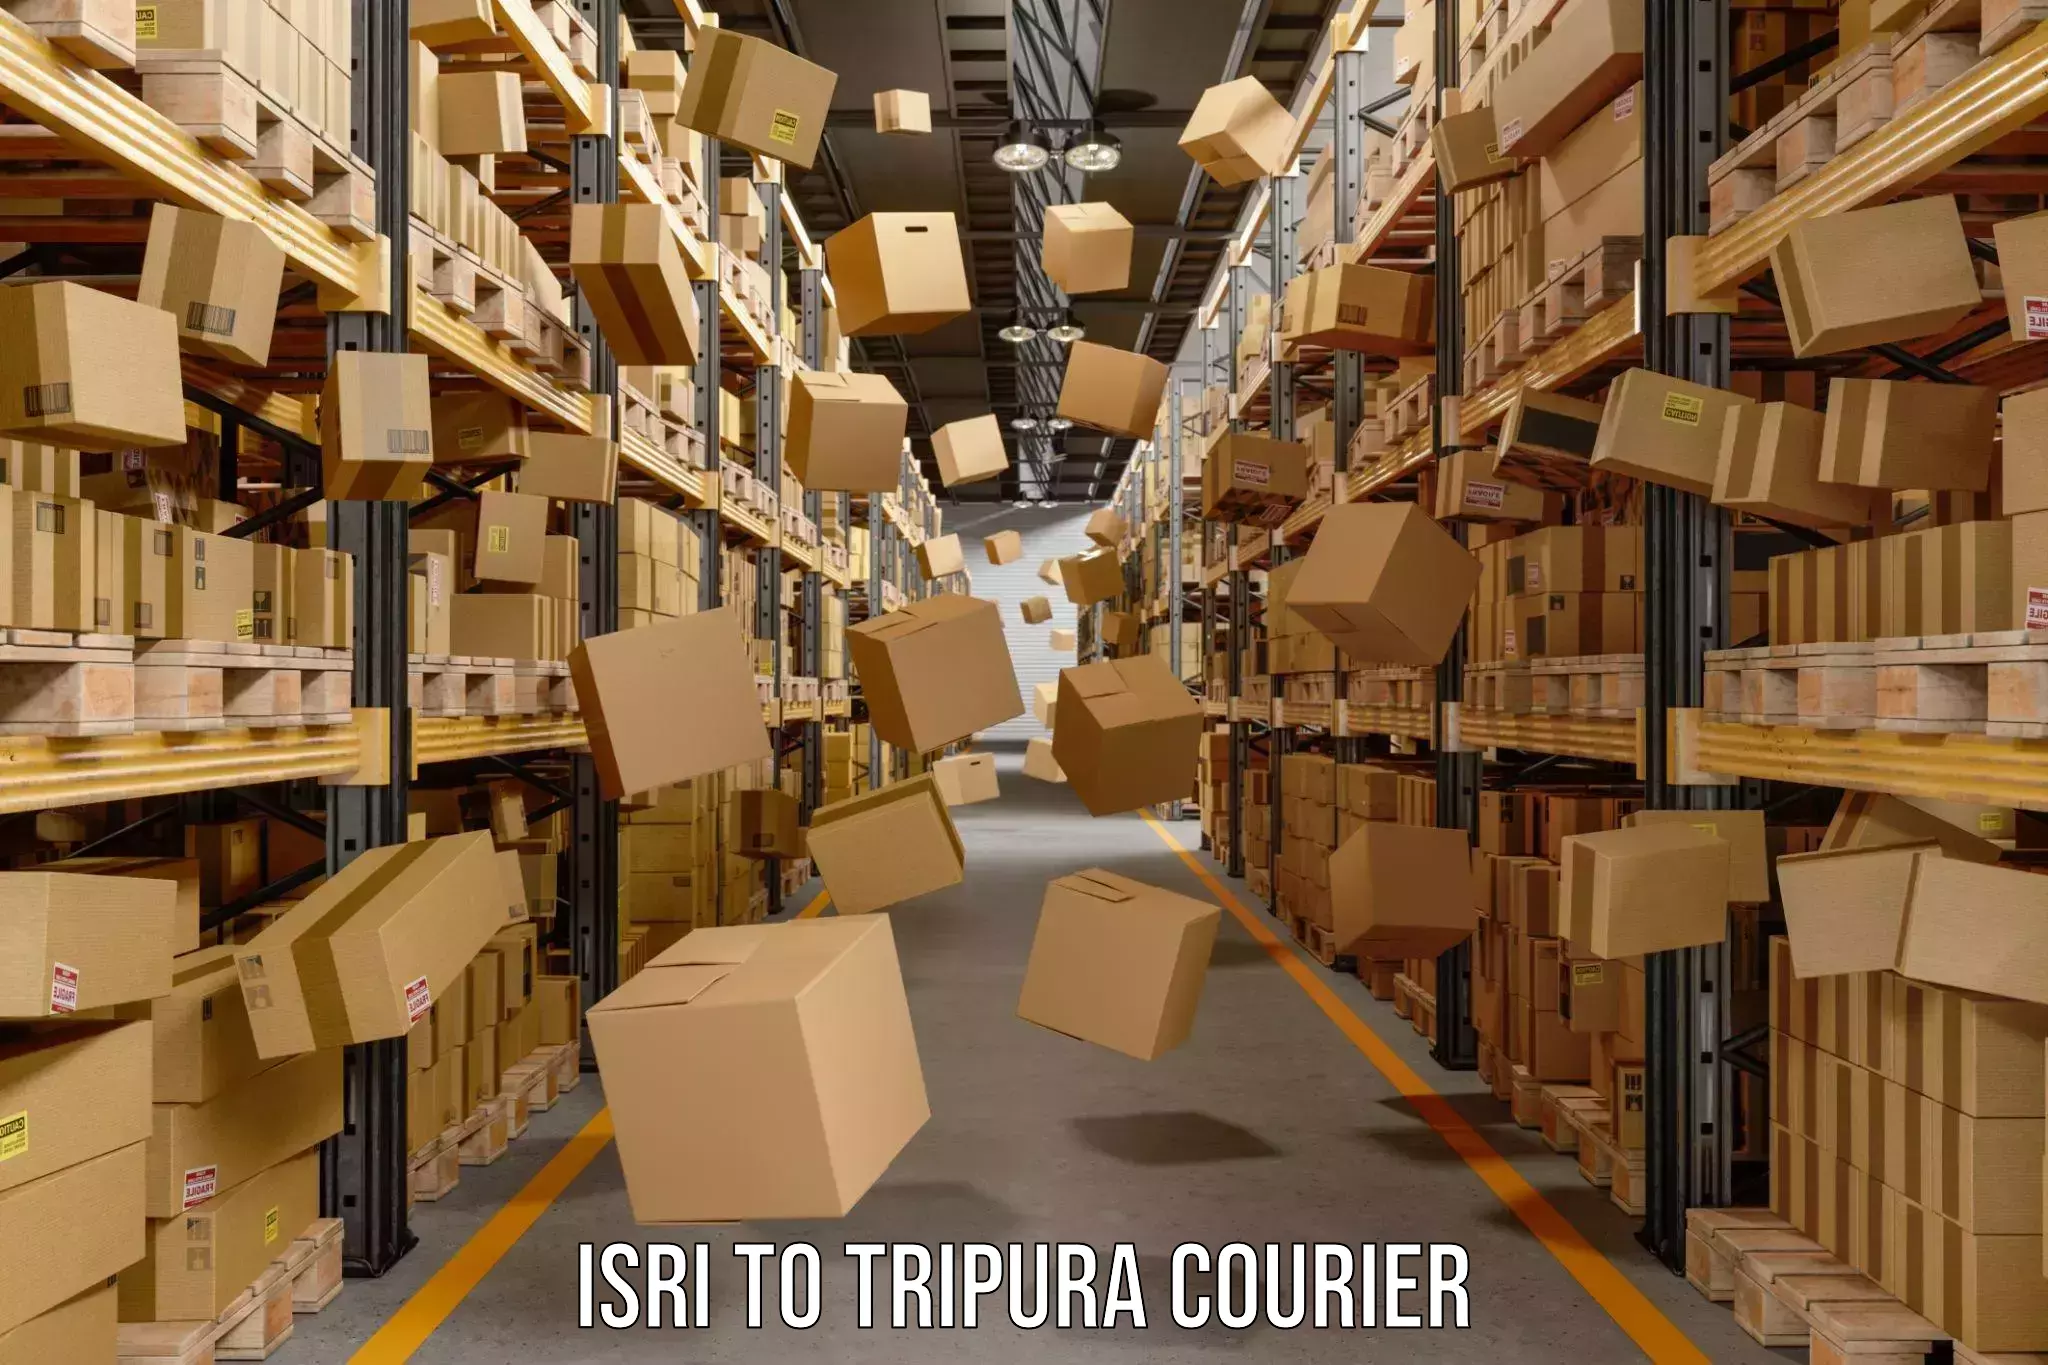 Reliable courier service Isri to Udaipur Tripura